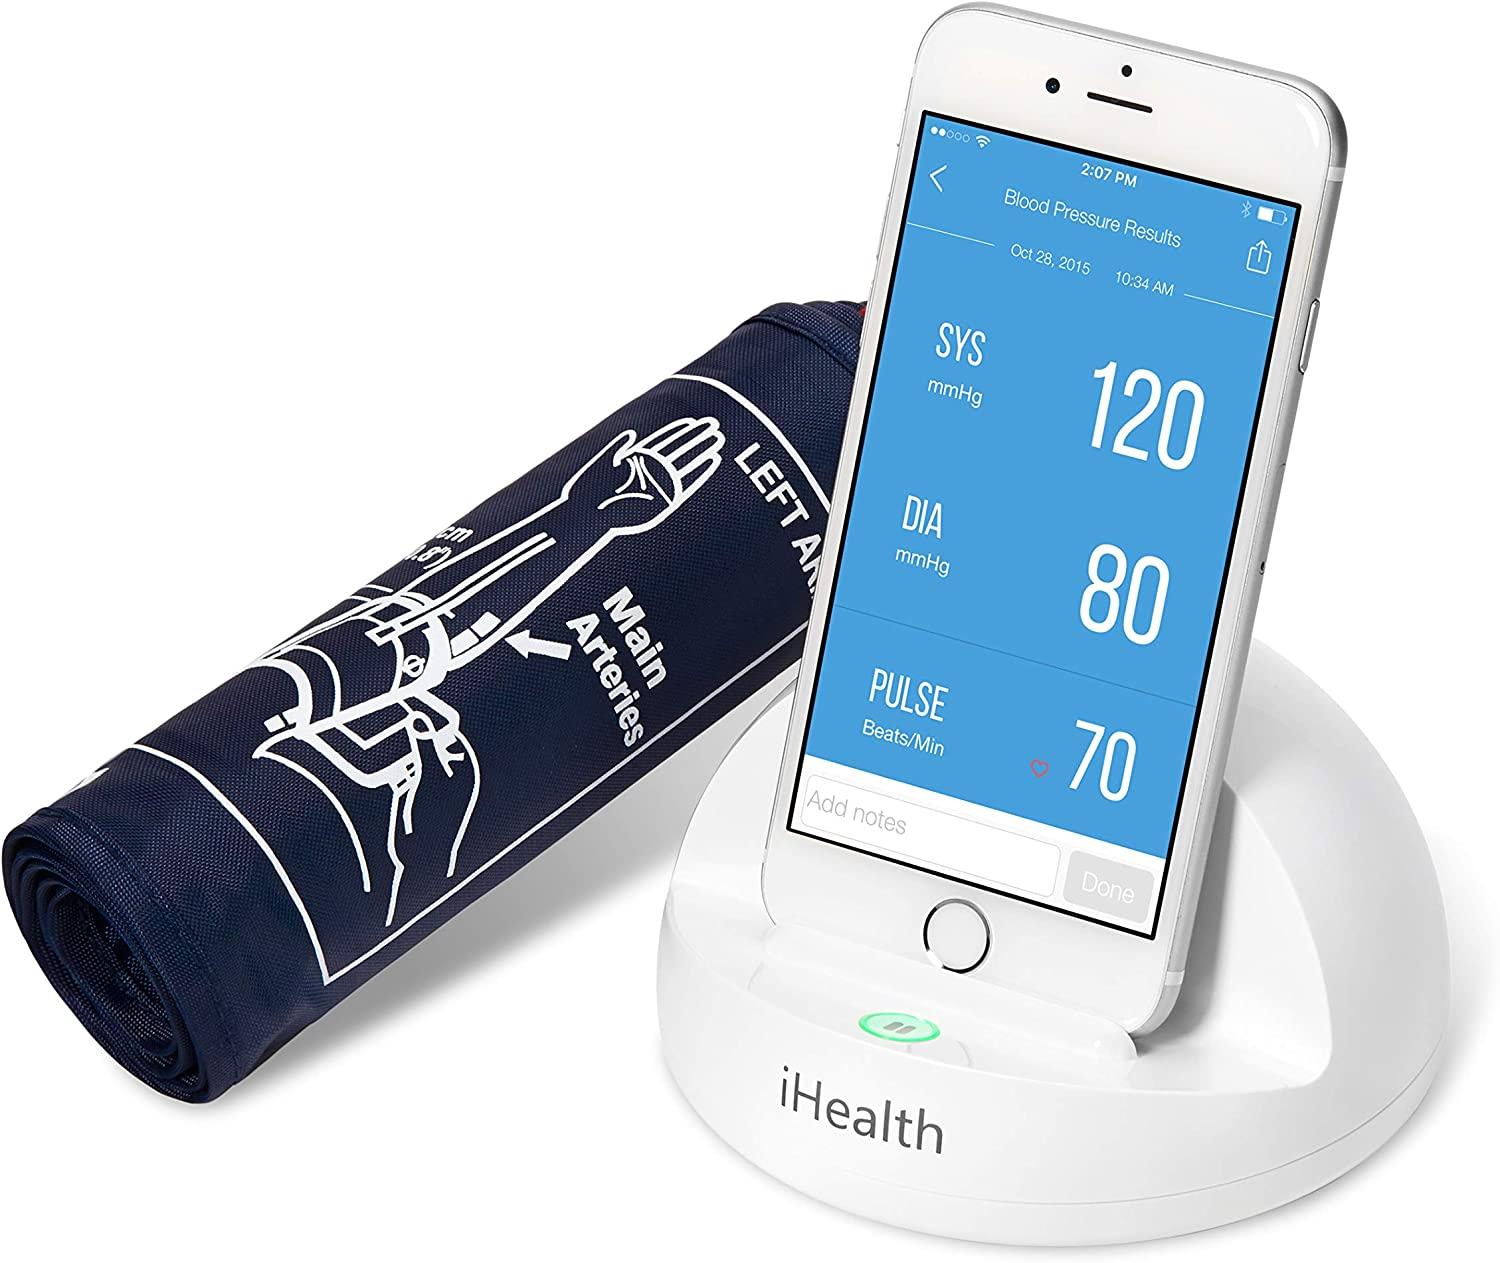 iHealth Ease Wireless Bluetooth Blood Pressure Monitor Kit for $10 Shipped